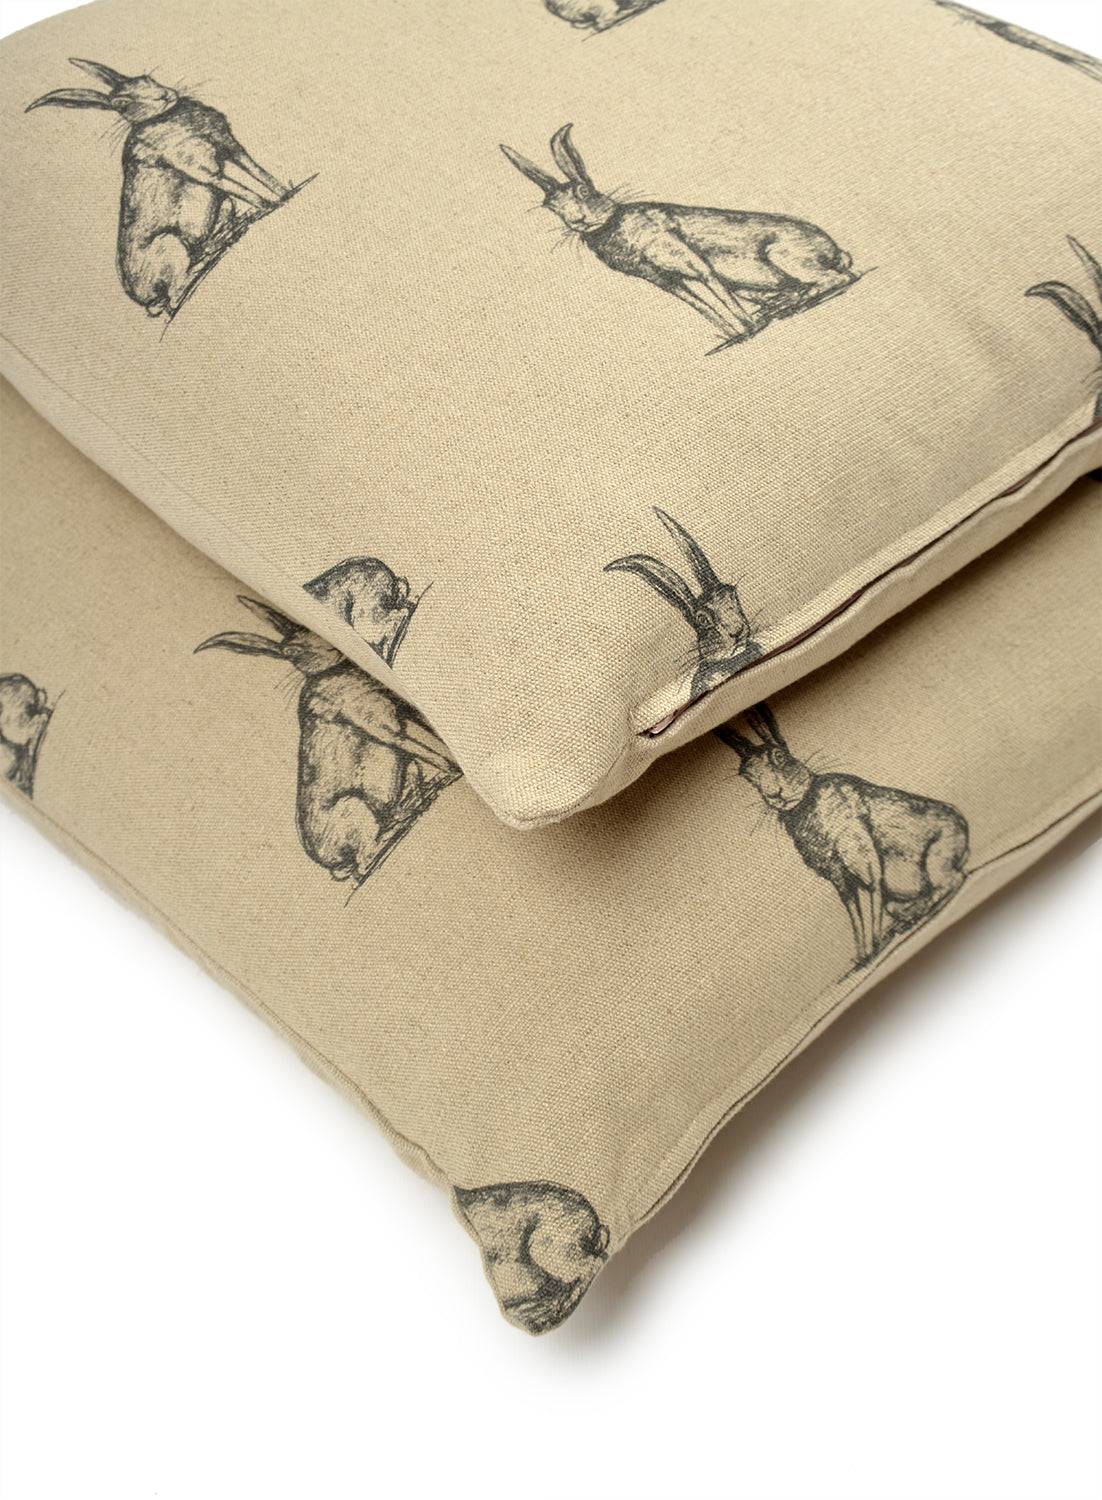 Hares Linen Cushion by Woodcock & Cavendish for sale - Woodcock and Cavendish